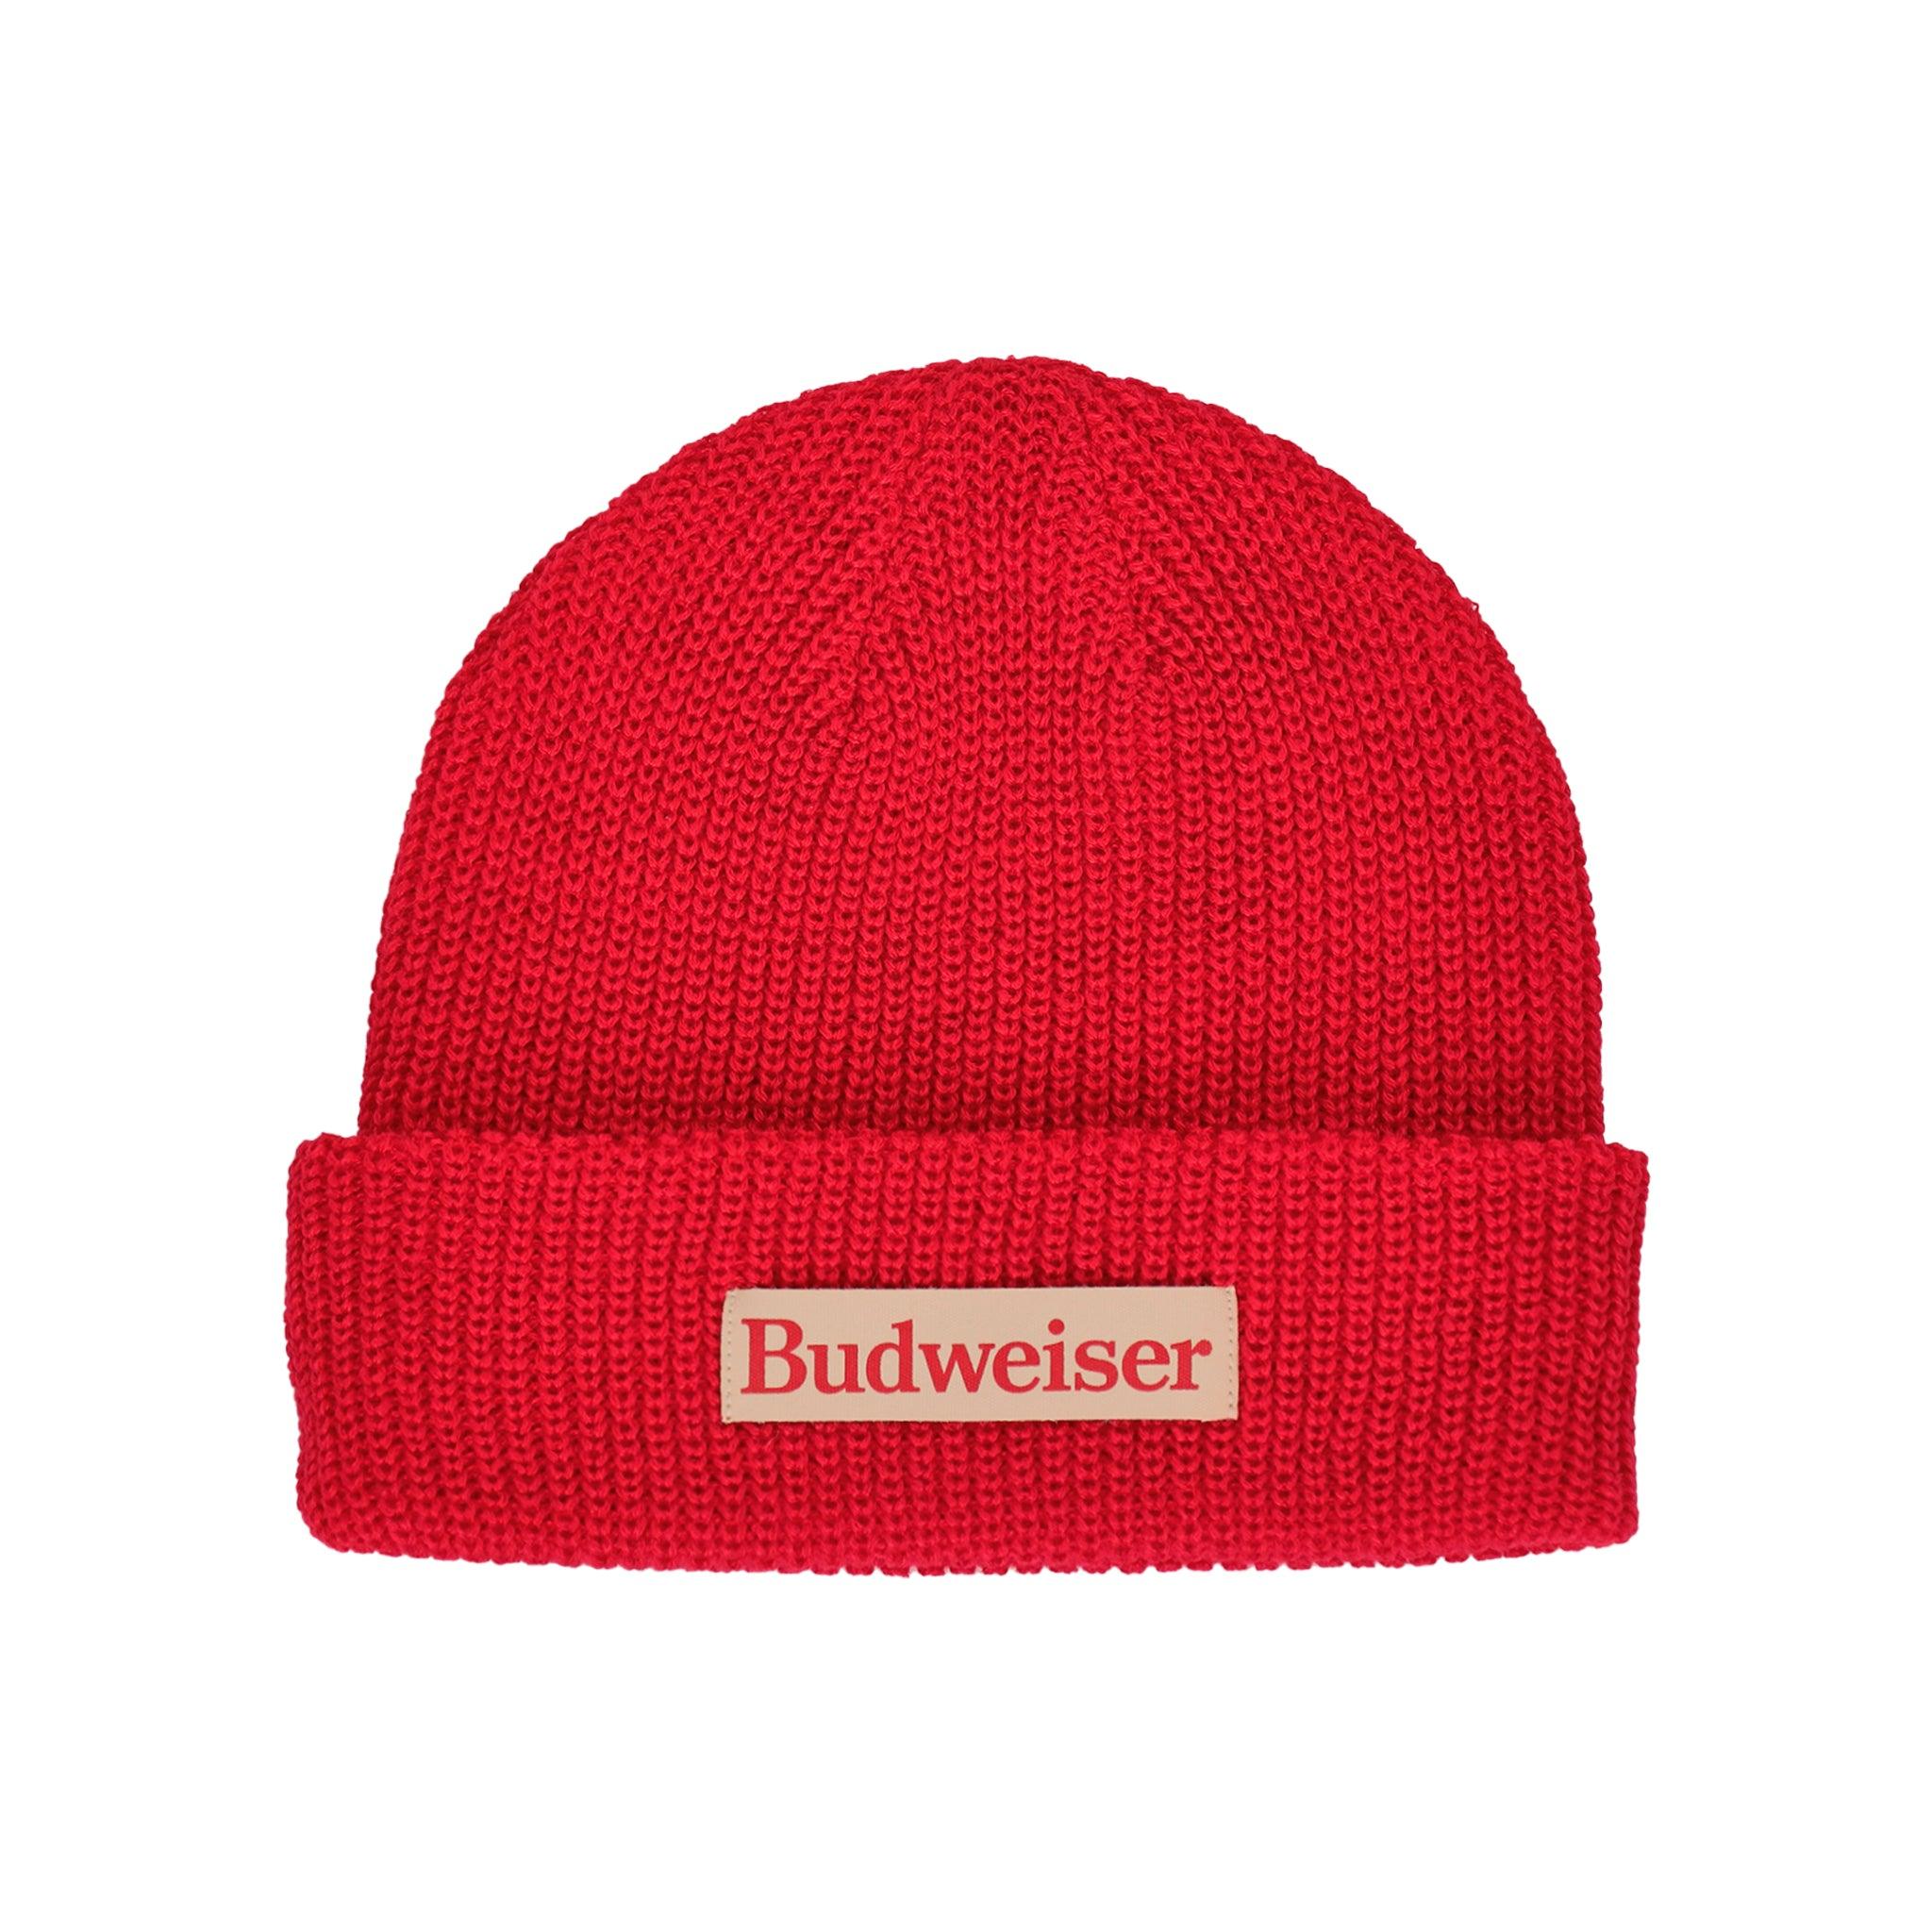 red beanie with budweiser logo on front